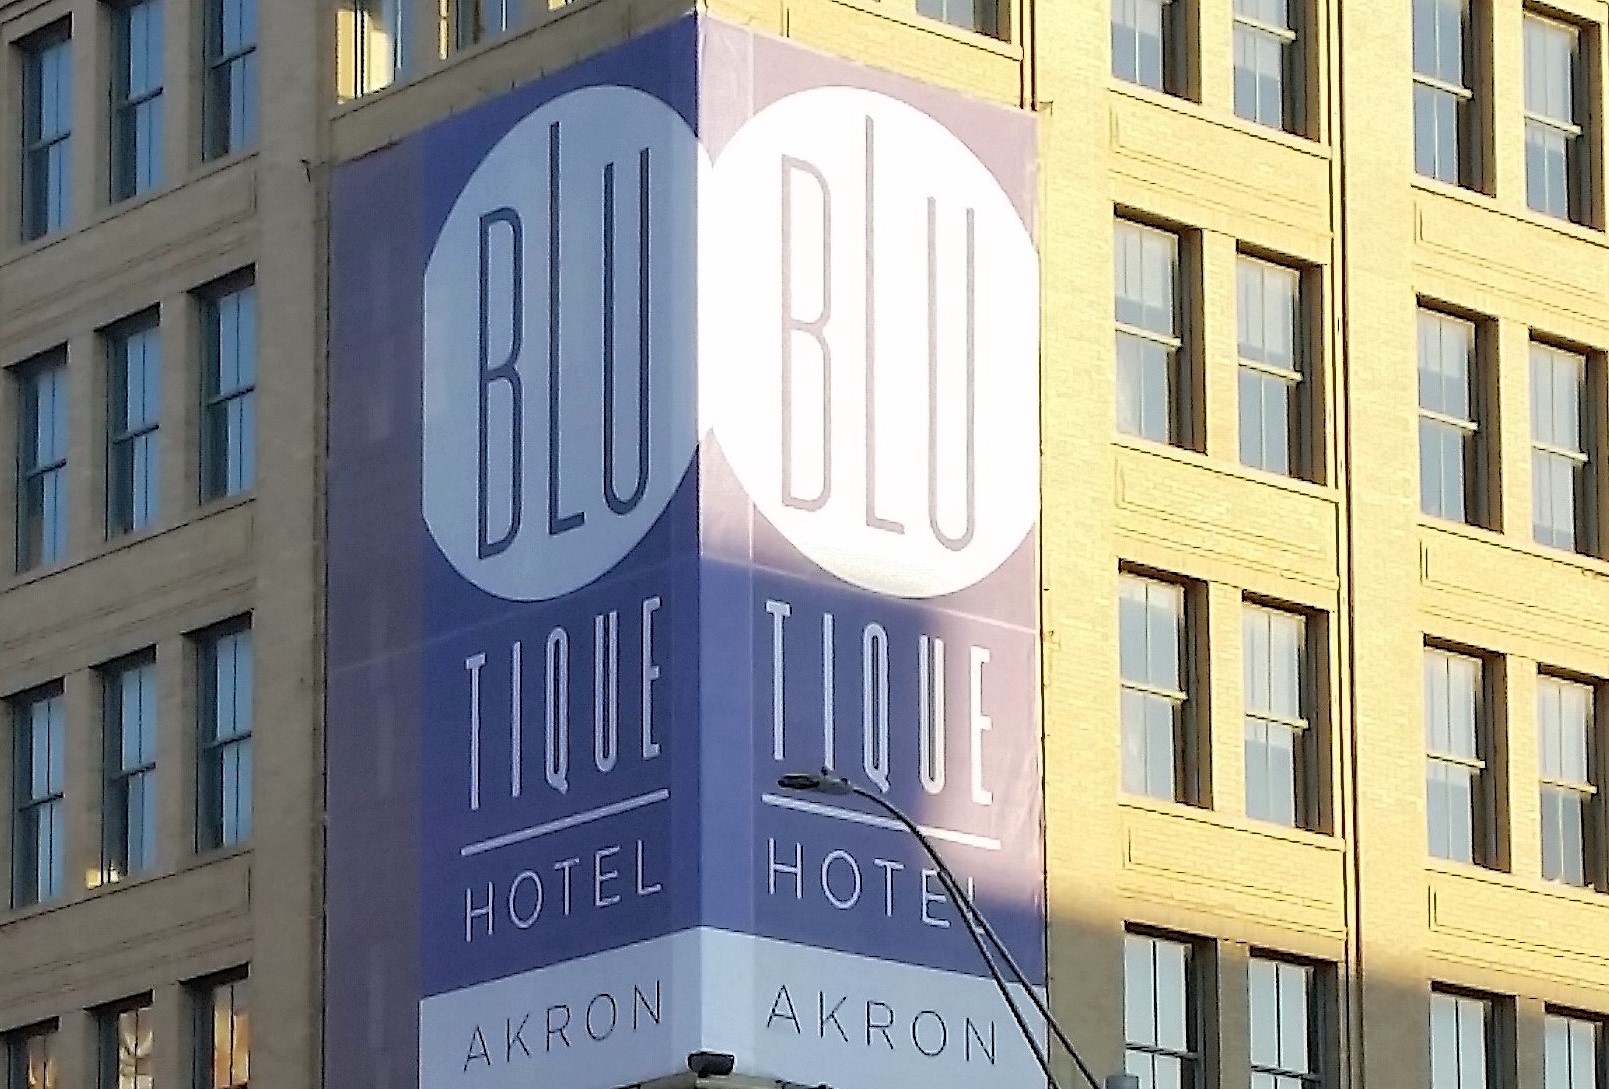 Giant outdoor display for Blu Tique Hotel Akron